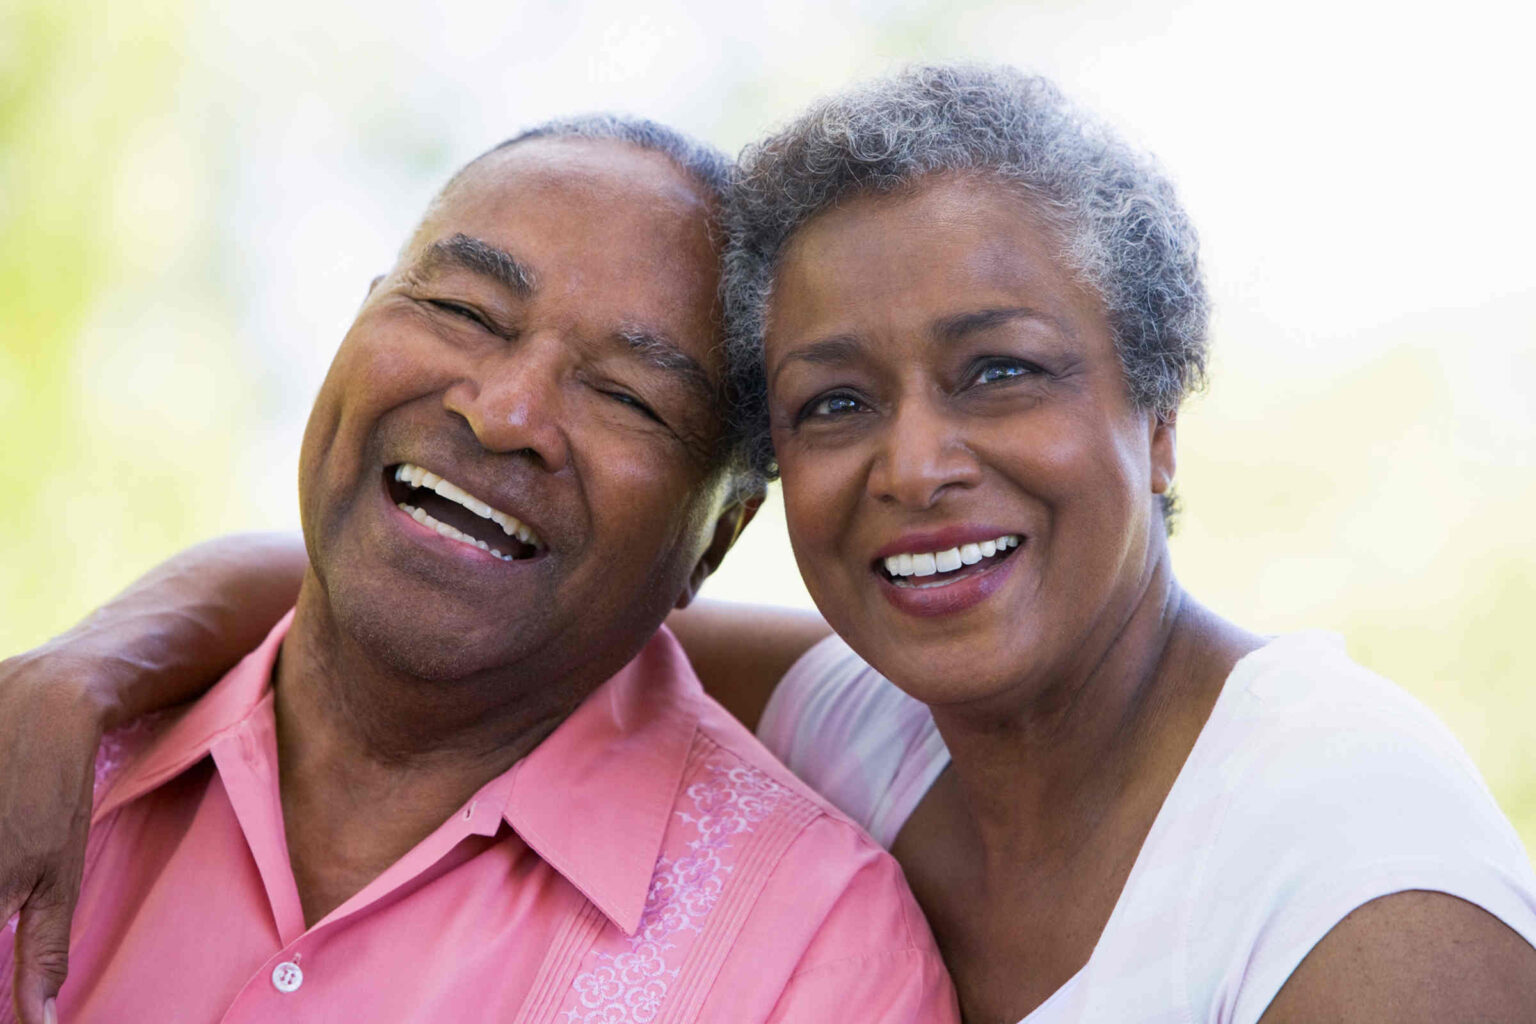 When you think of replacing one or more missing teeth, there are a few options involving implants and dentures.